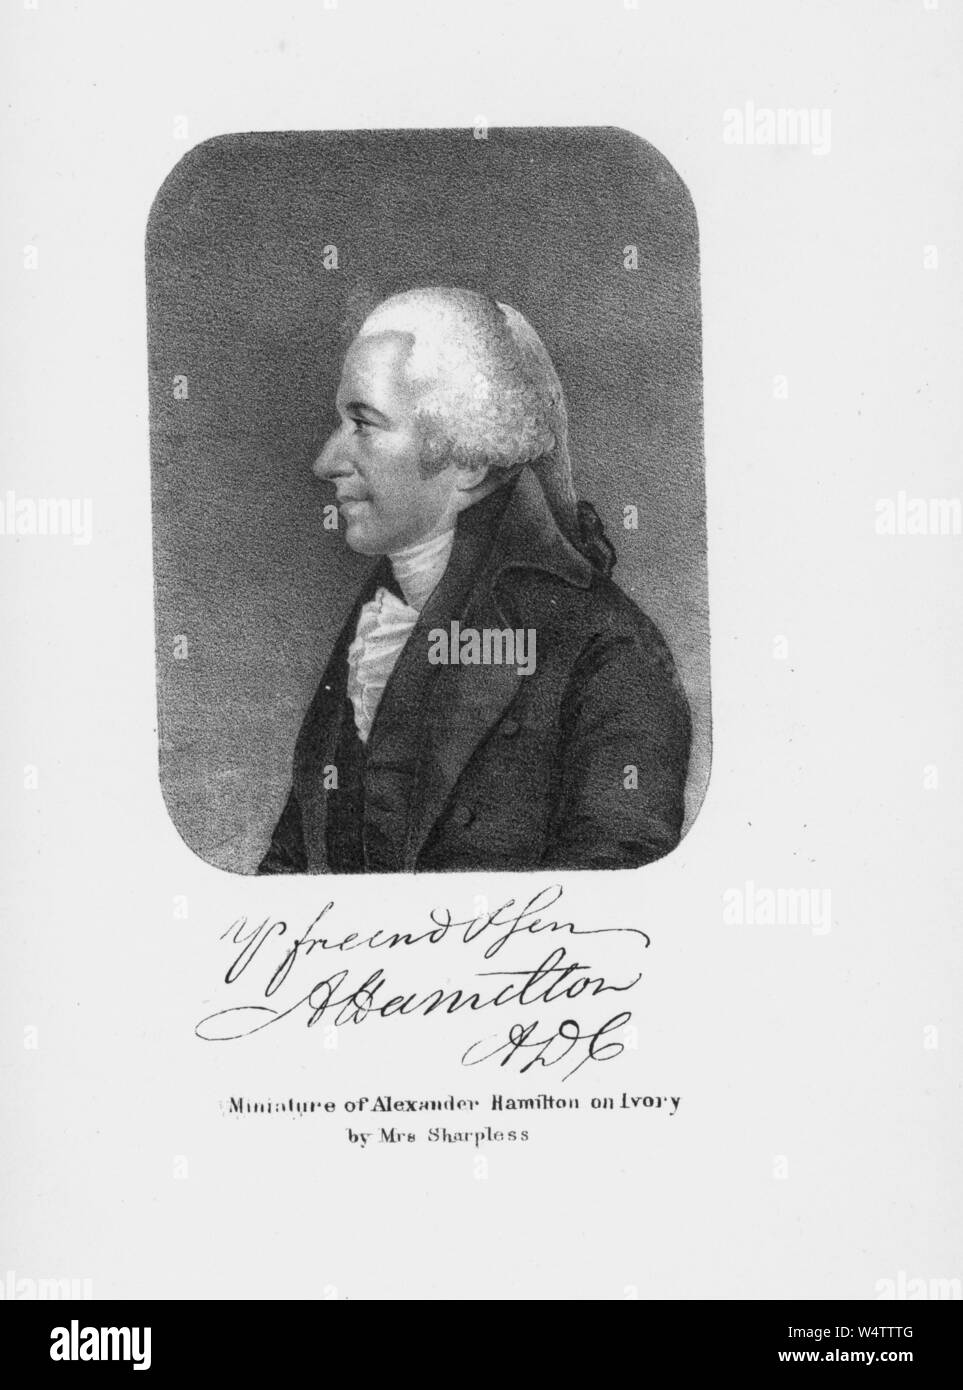 Engraved portrait of Alexander Hamilton, one of the Founding Fathers of the United States, an American statesman from Charlestown, Nevis, 1775. () Stock Photo